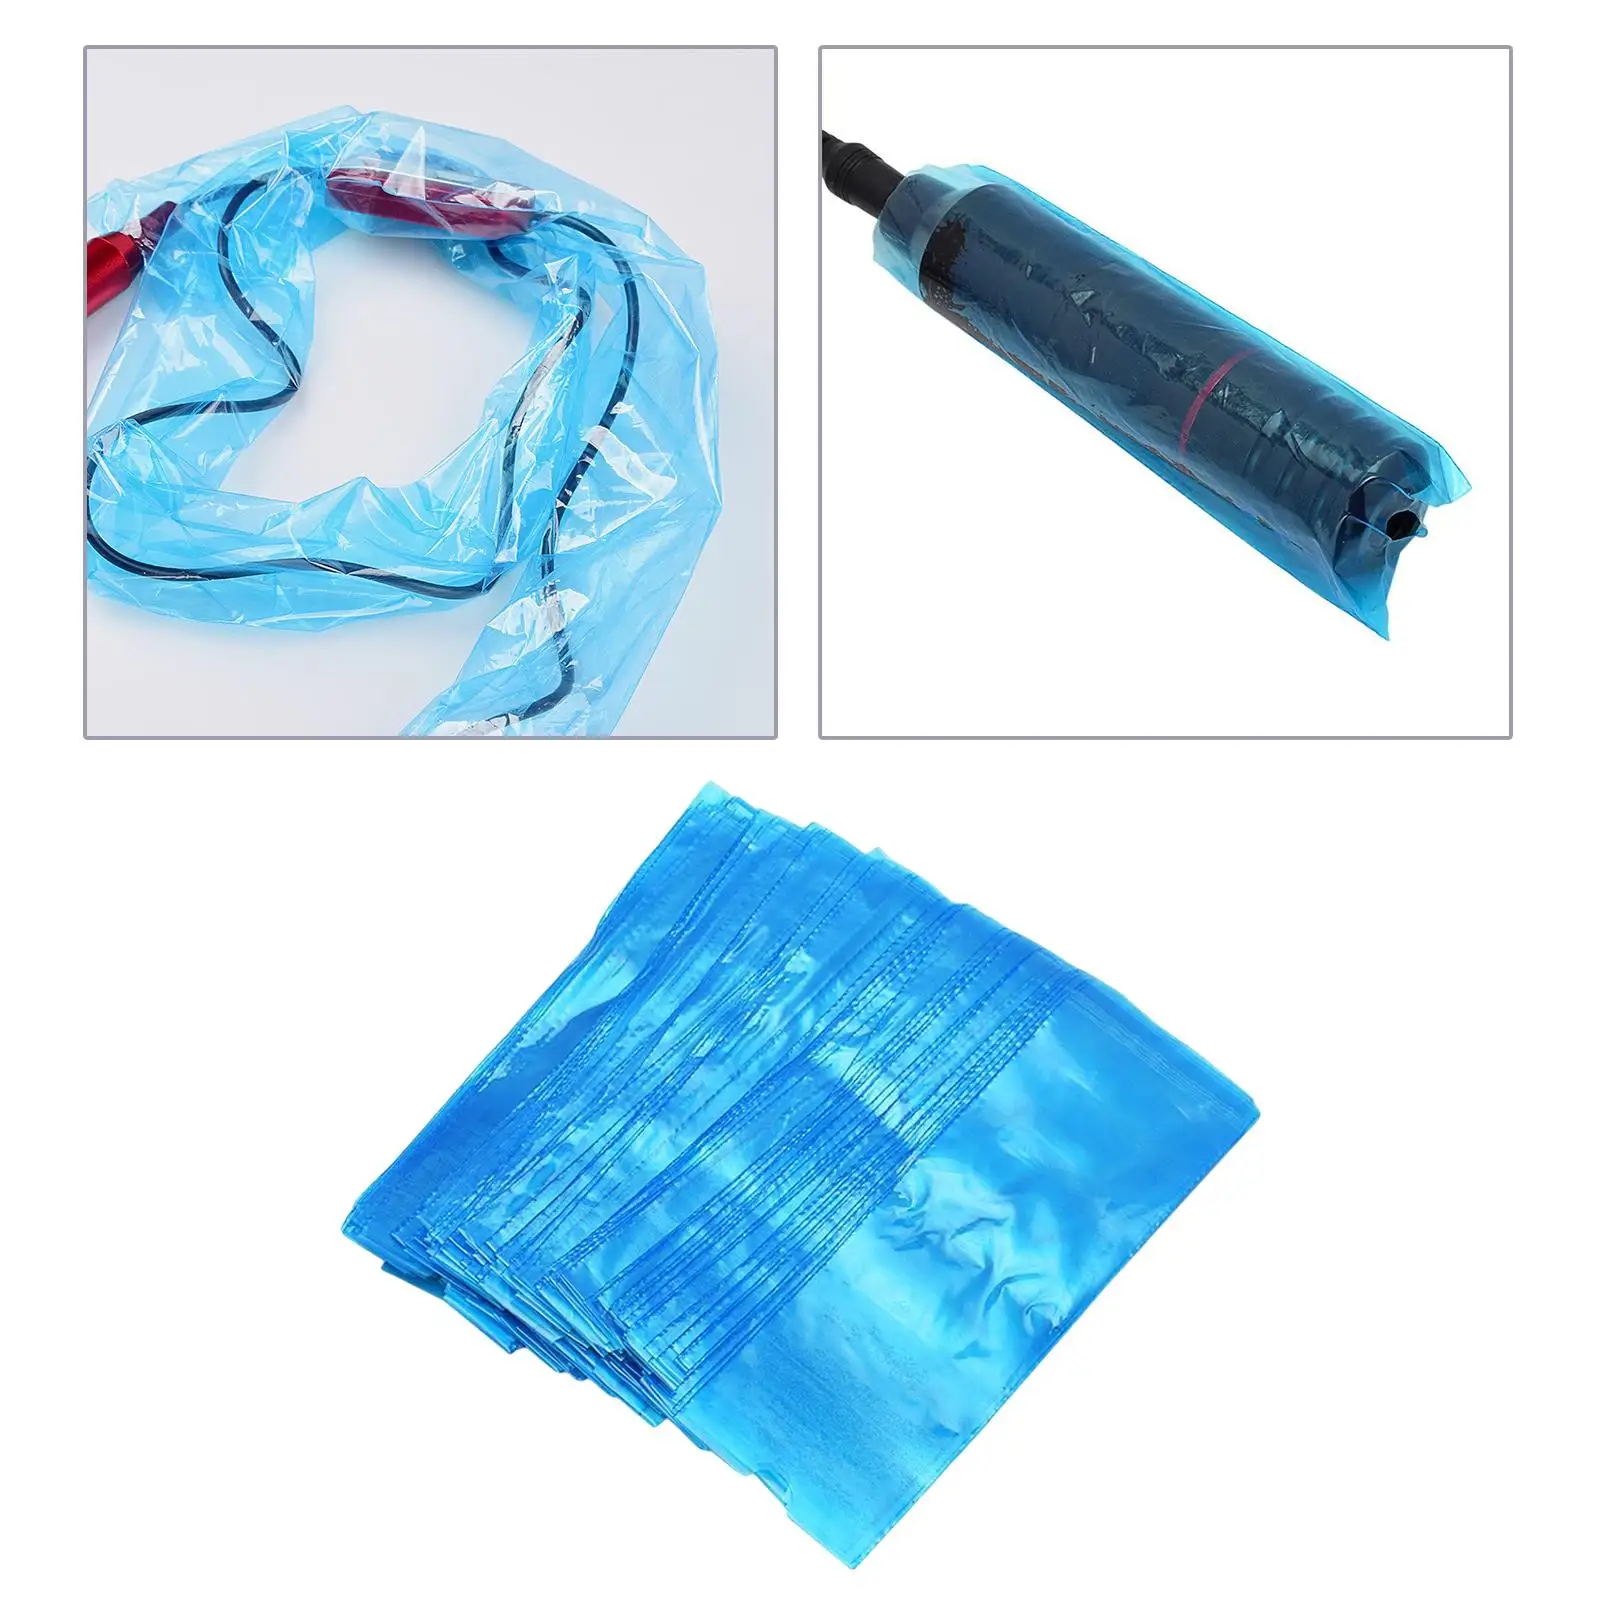 200x Tattoo Clip Cord Sleeves Disposable Fittings Safety Protection Bags Covers Hygiene Tattoo Cover Equipment for Tattoo Pen